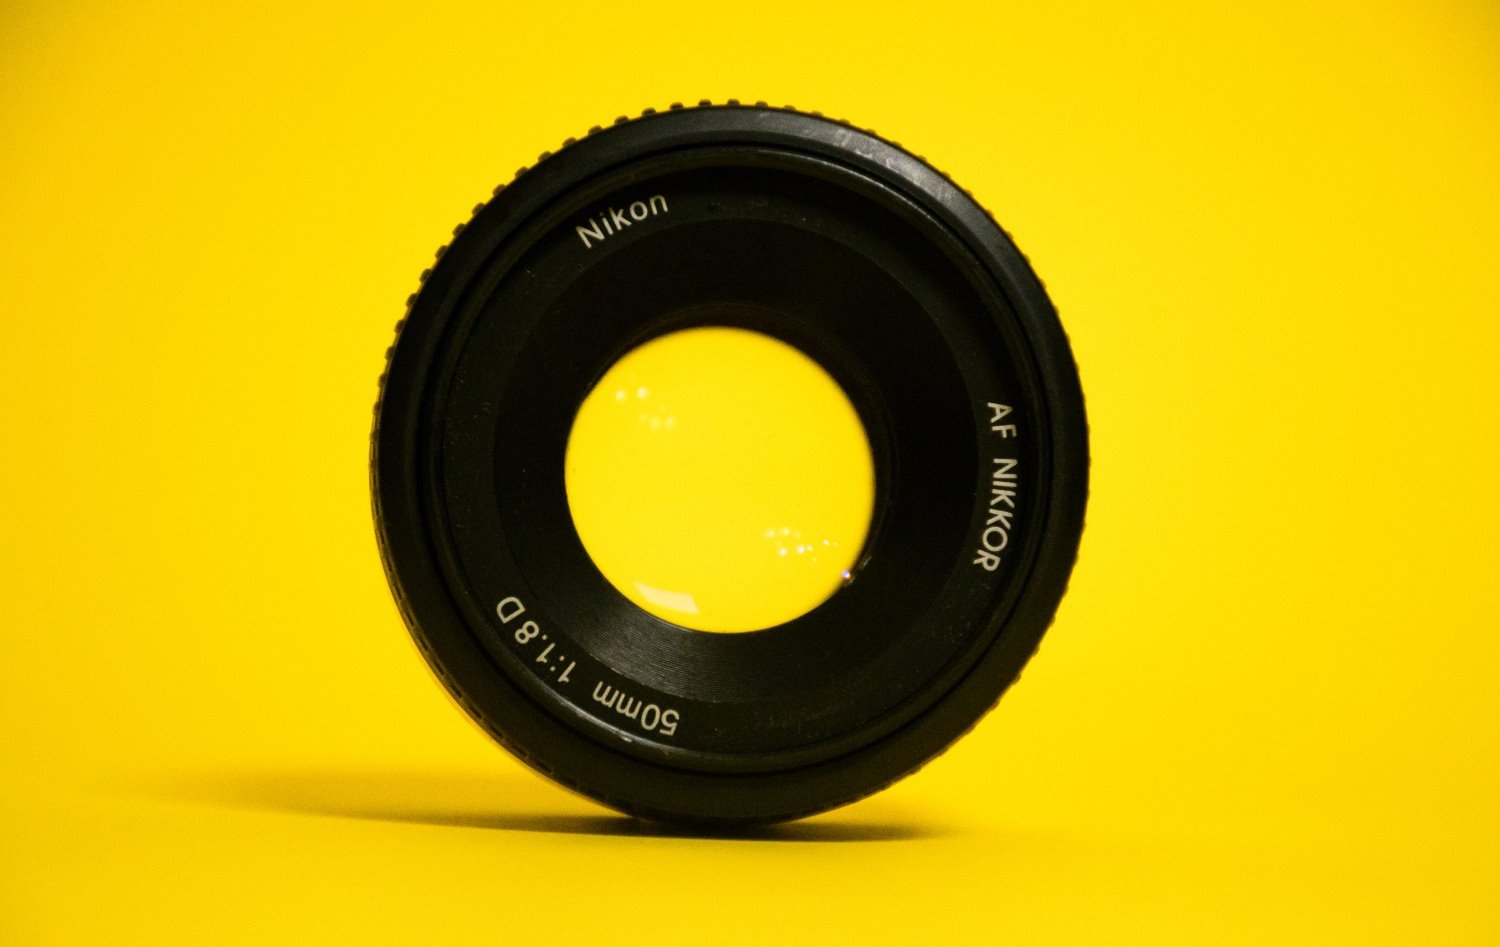 50mm photography and 50mm lenses